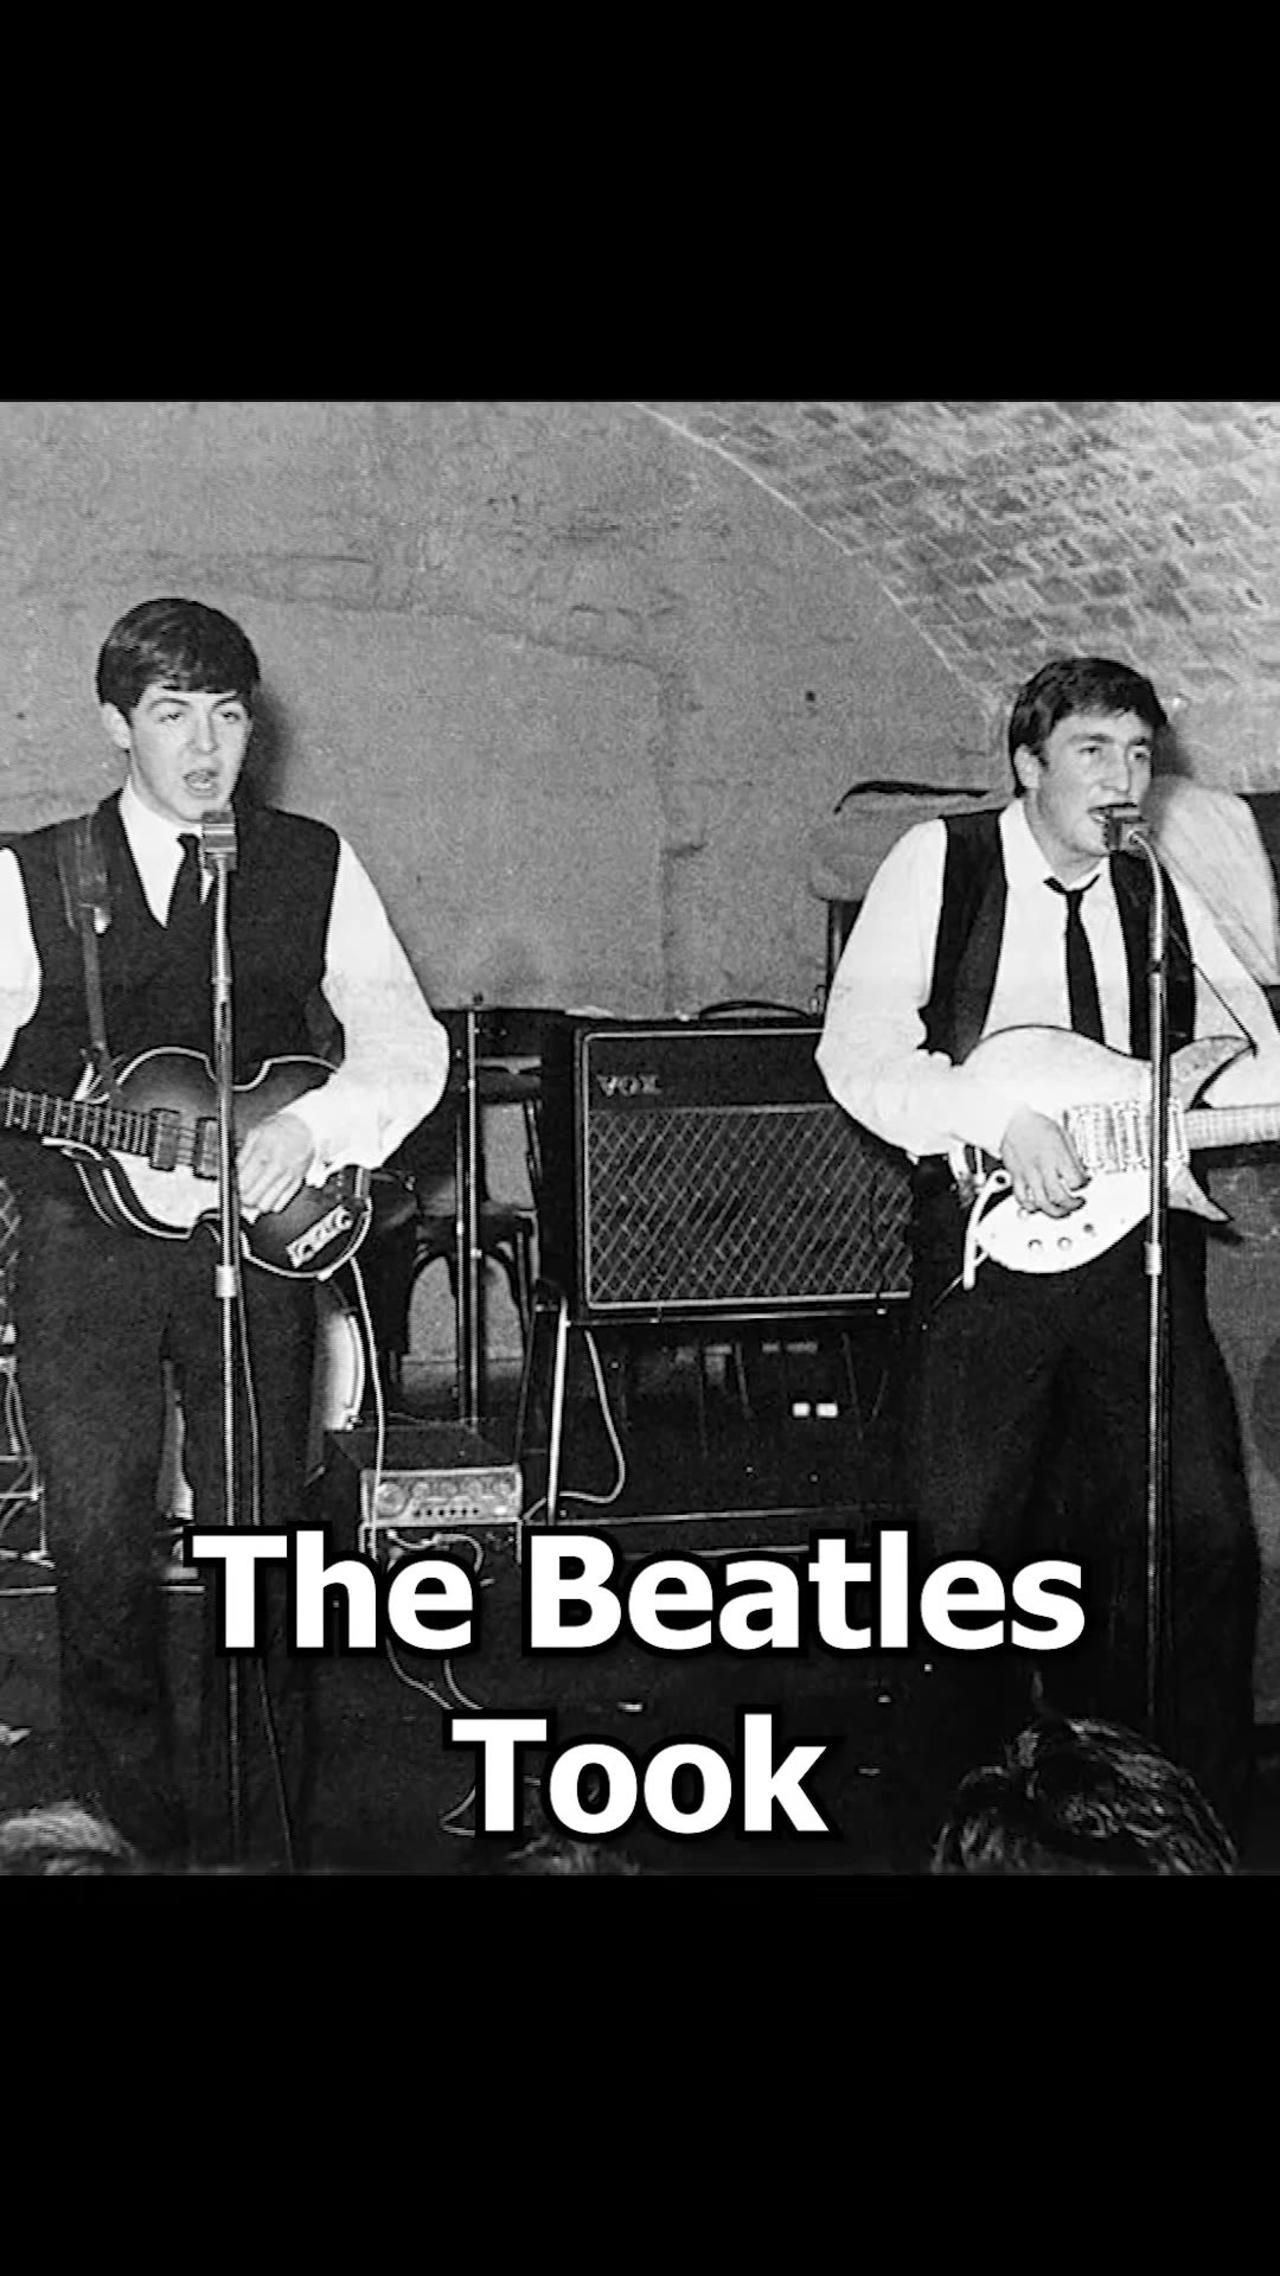 THE BEATLES Cavern Club Opens! - January 16th, 1957